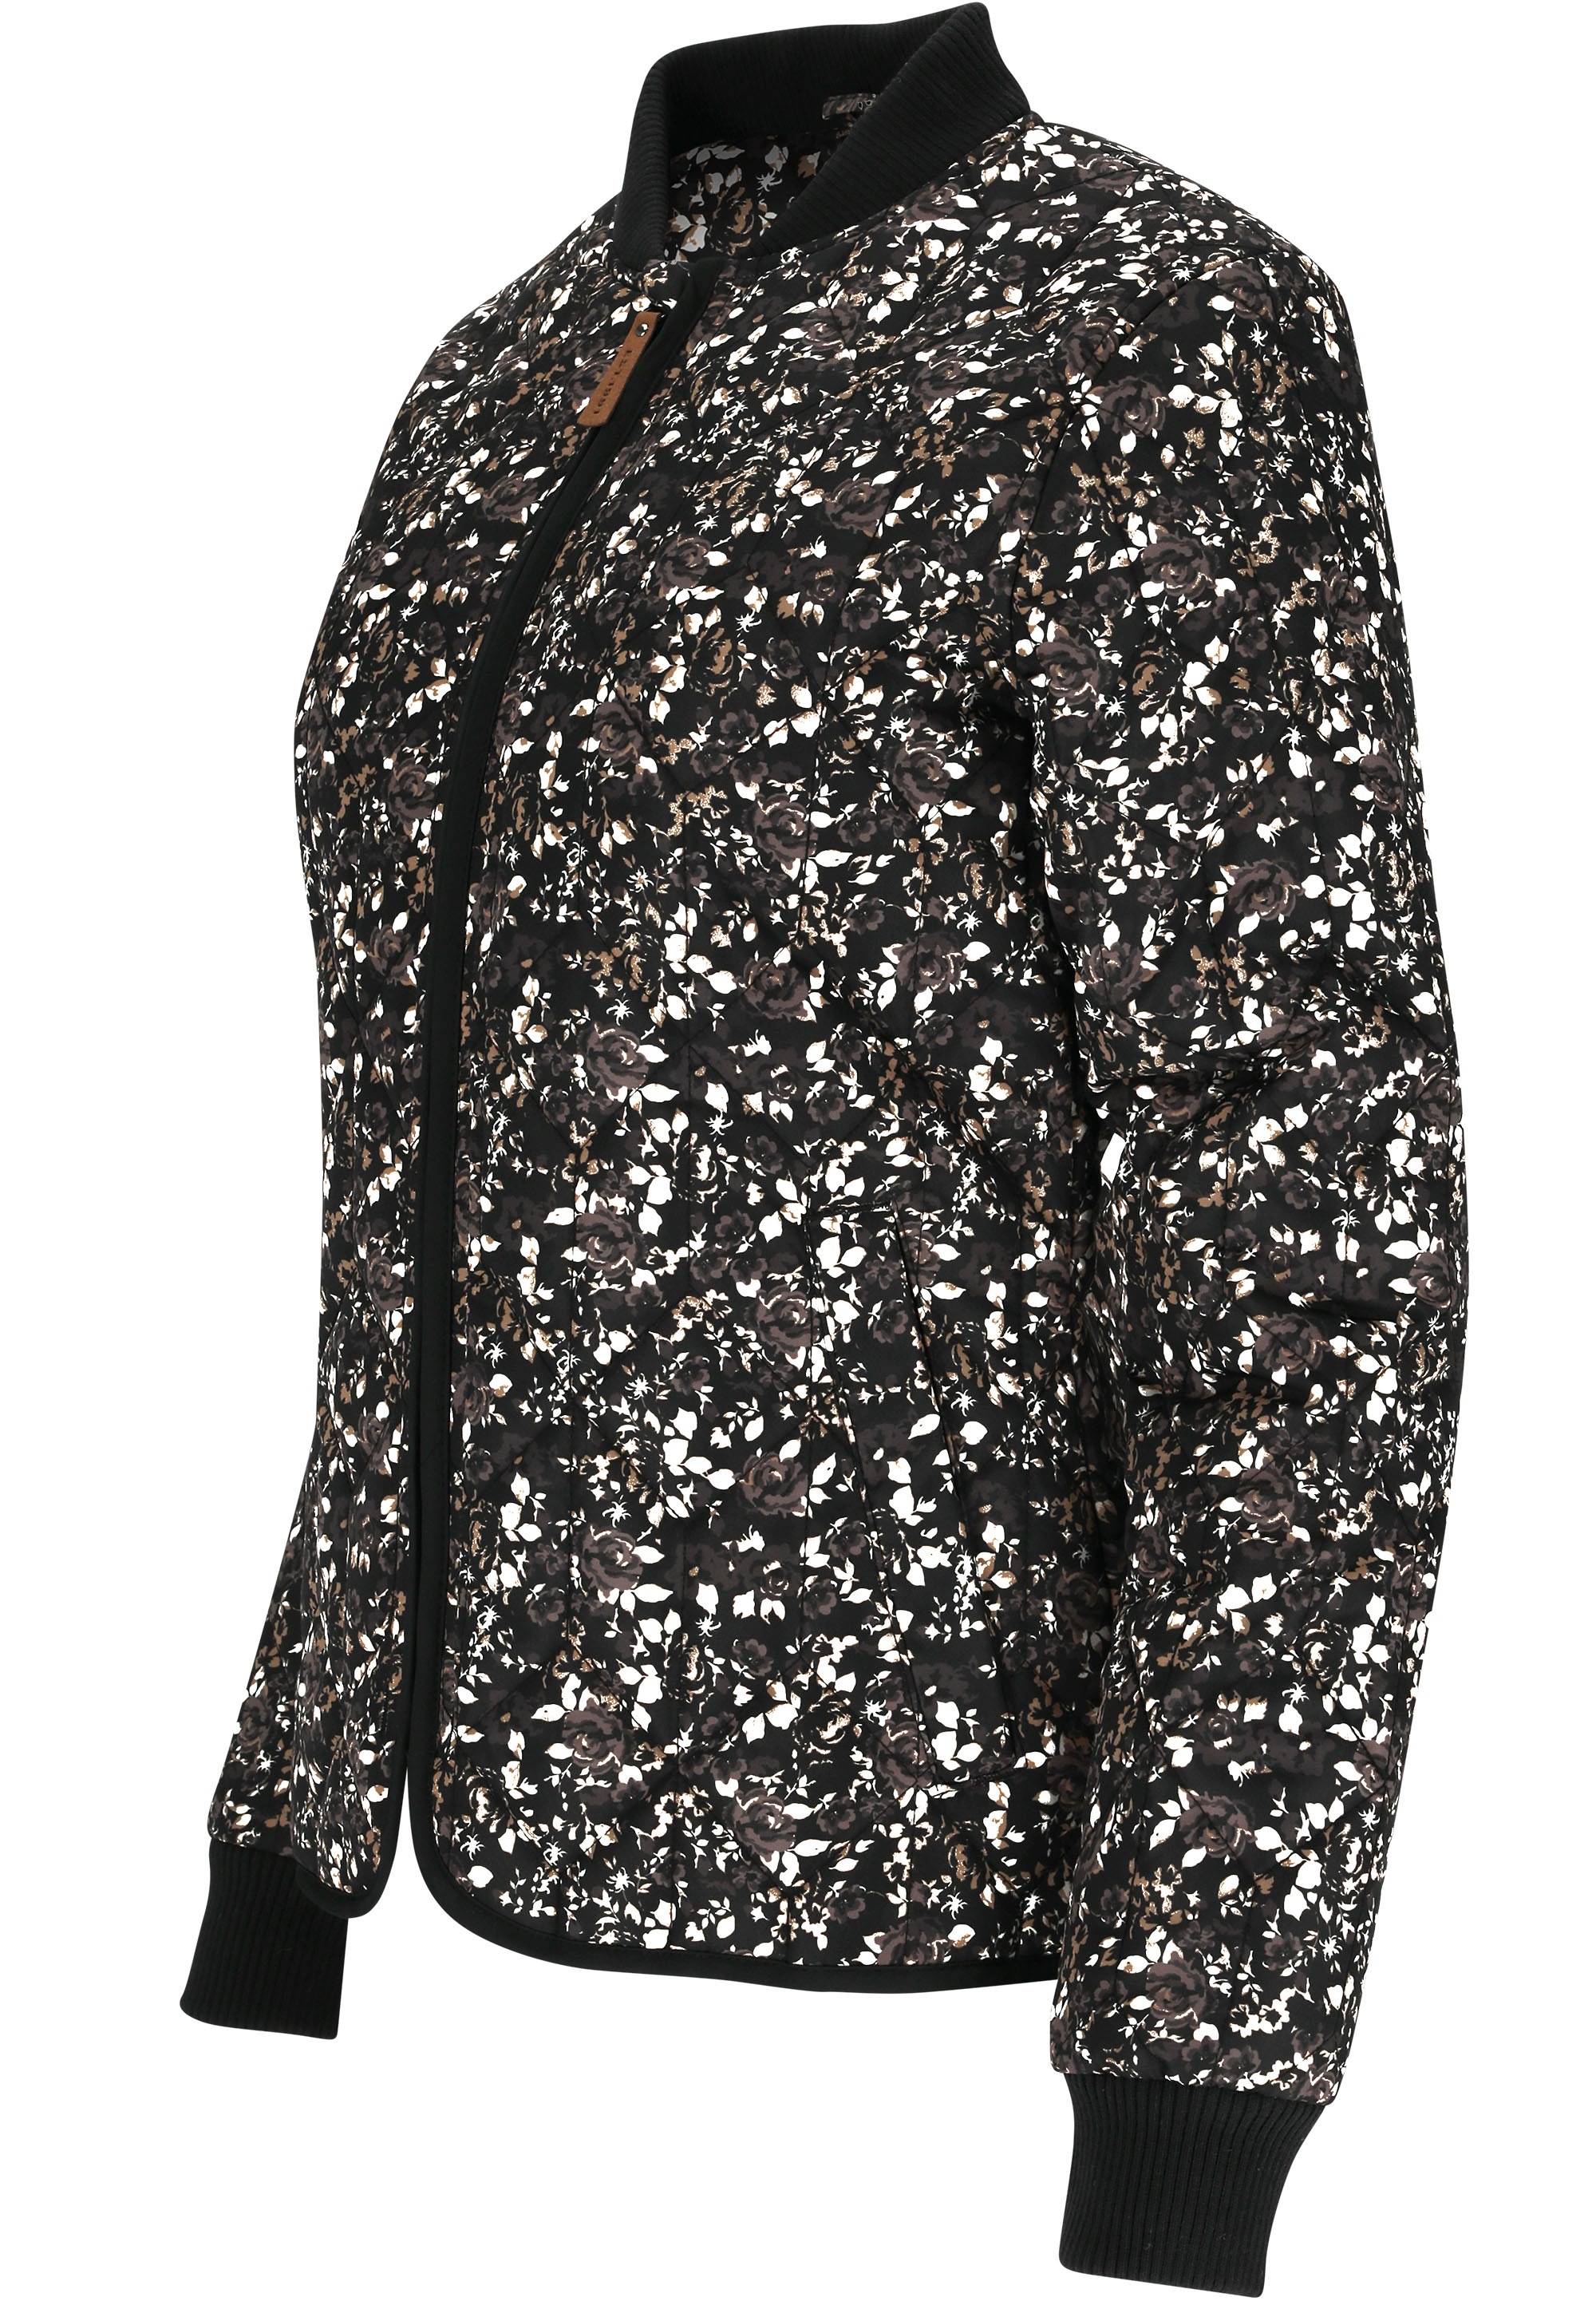 WEATHER REPORT Outdoorjacke »Floral«, Allover-Muster floralem online mit